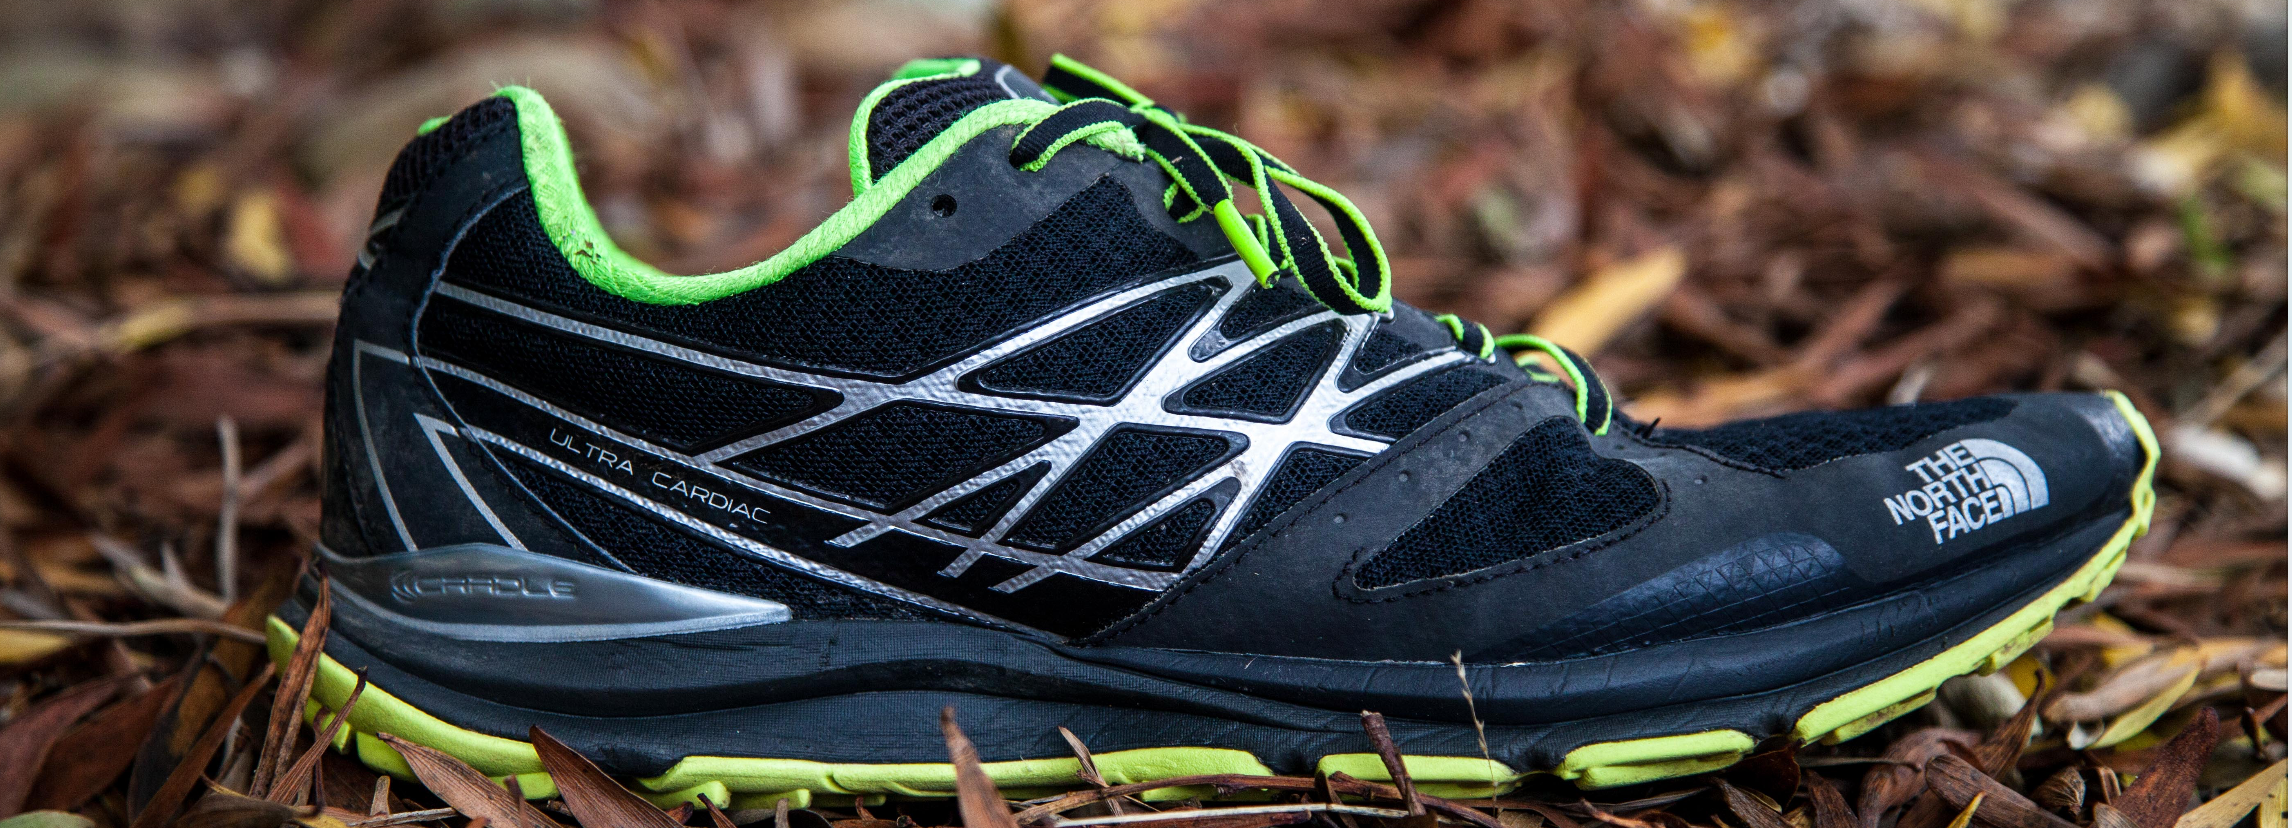 the north face ultra cardiac 2 review